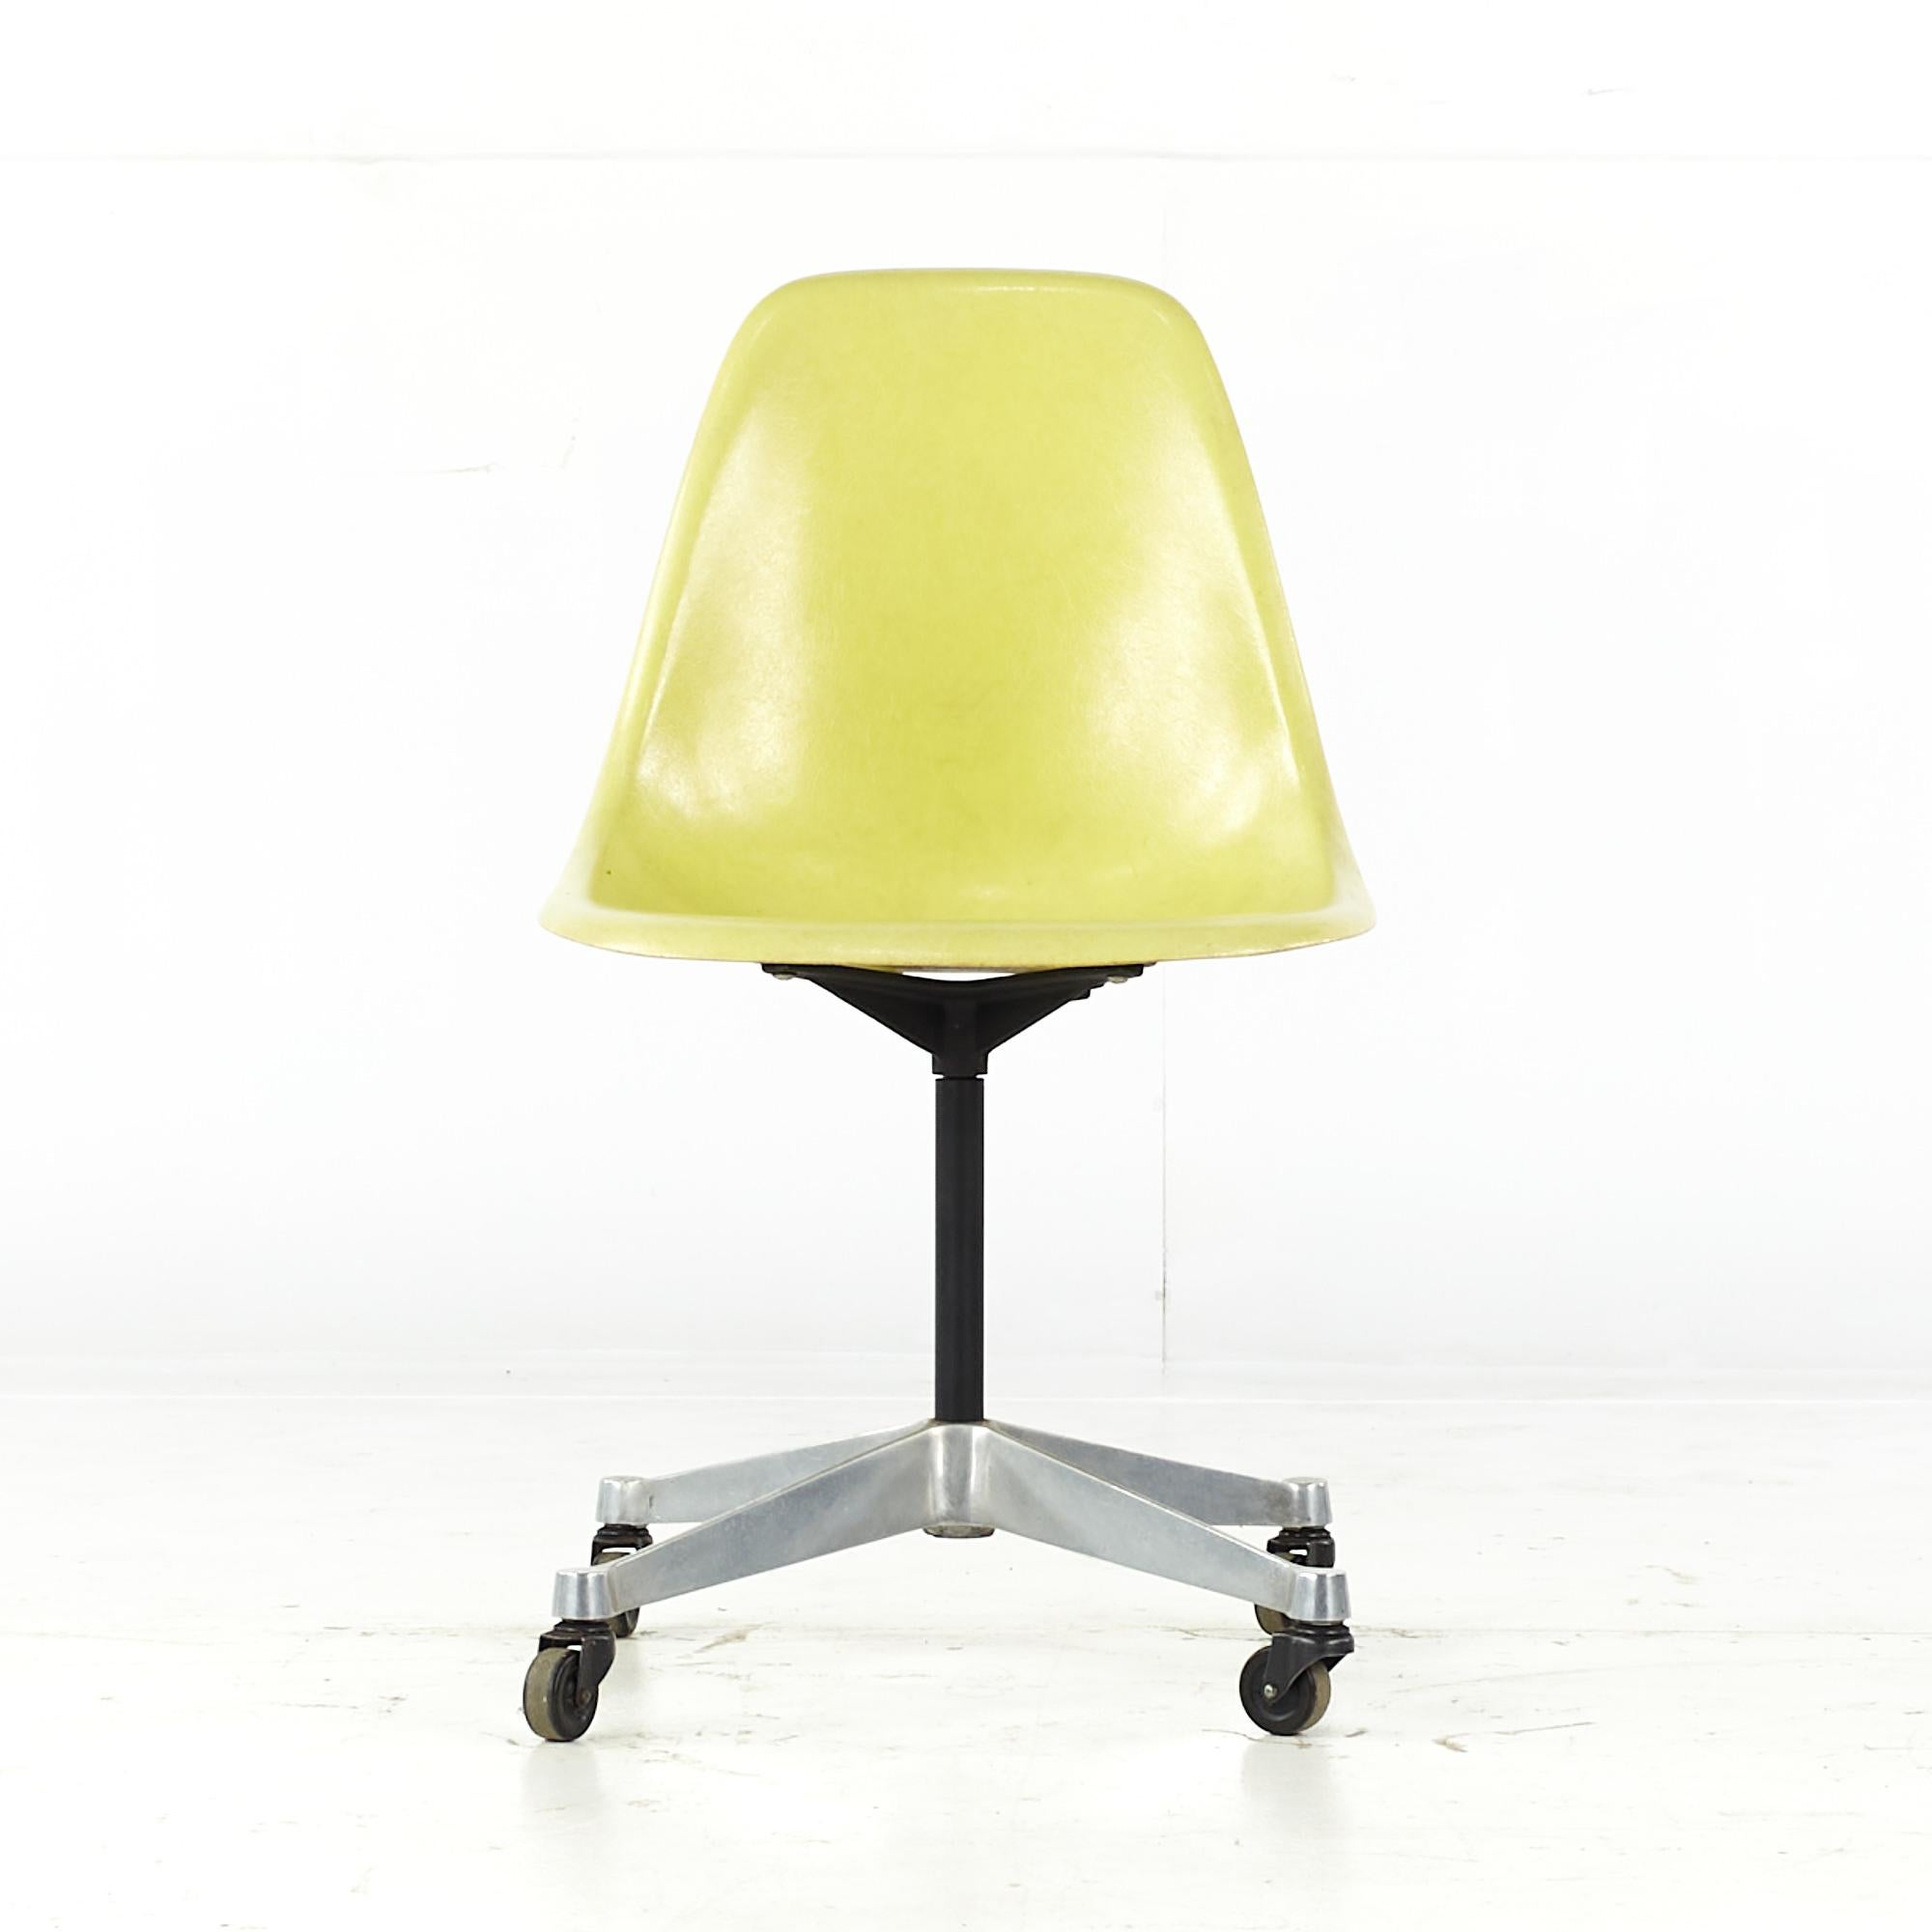 Charles and Ray Eames for Herman Miller mid century fiberglass wheeled shell chair

This chair measures: 18.5 wide x 24 deep x 32 high, with a seat height of 17.5 inches

All pieces of furniture can be had in what we call restored vintage